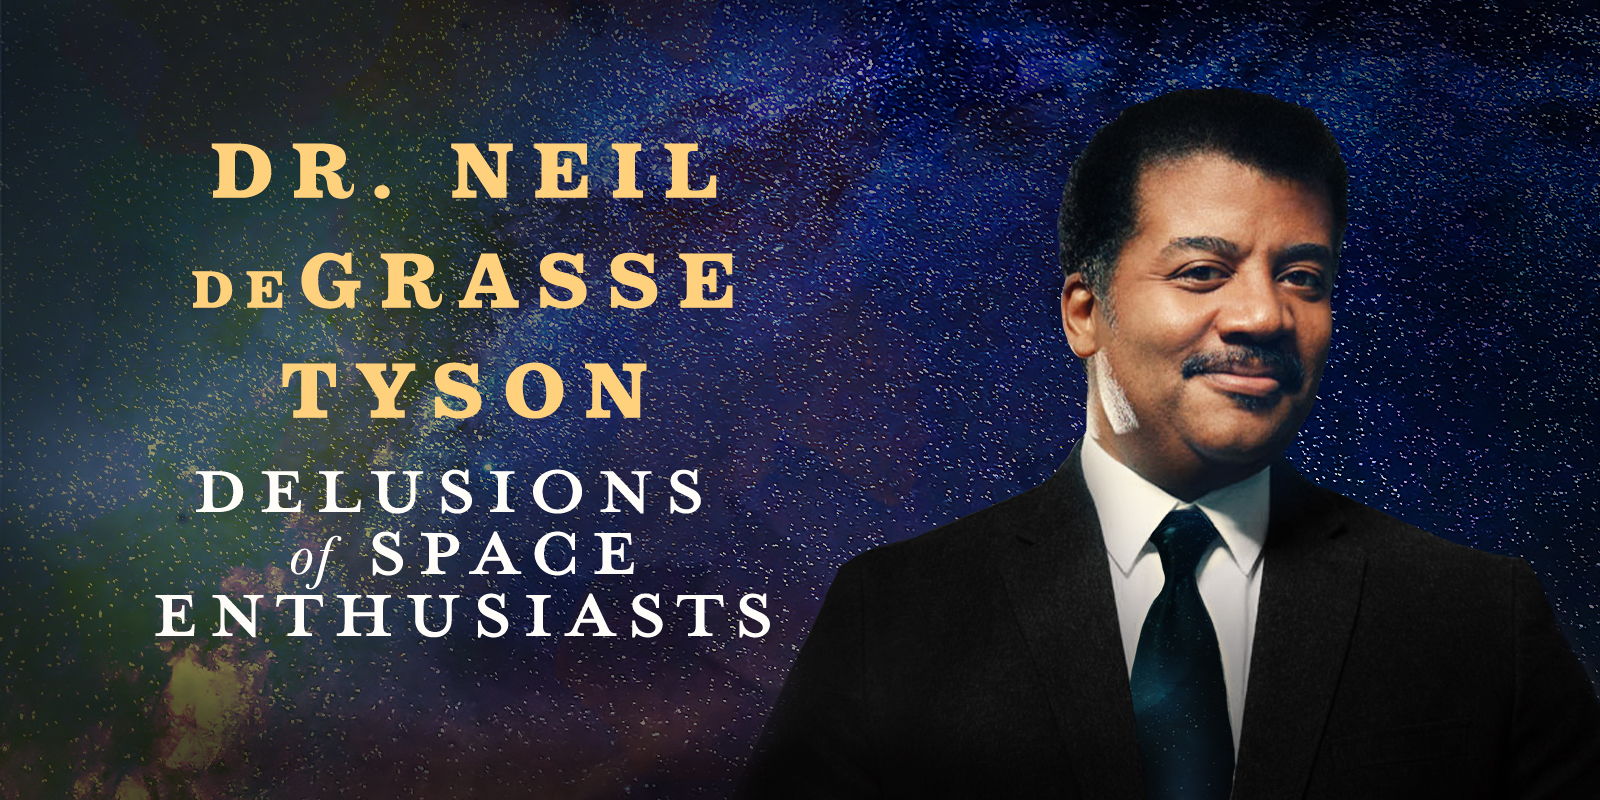 Dr. Neil DeGrasse Tyson - Delusions of Space Enthusiasts promotional image